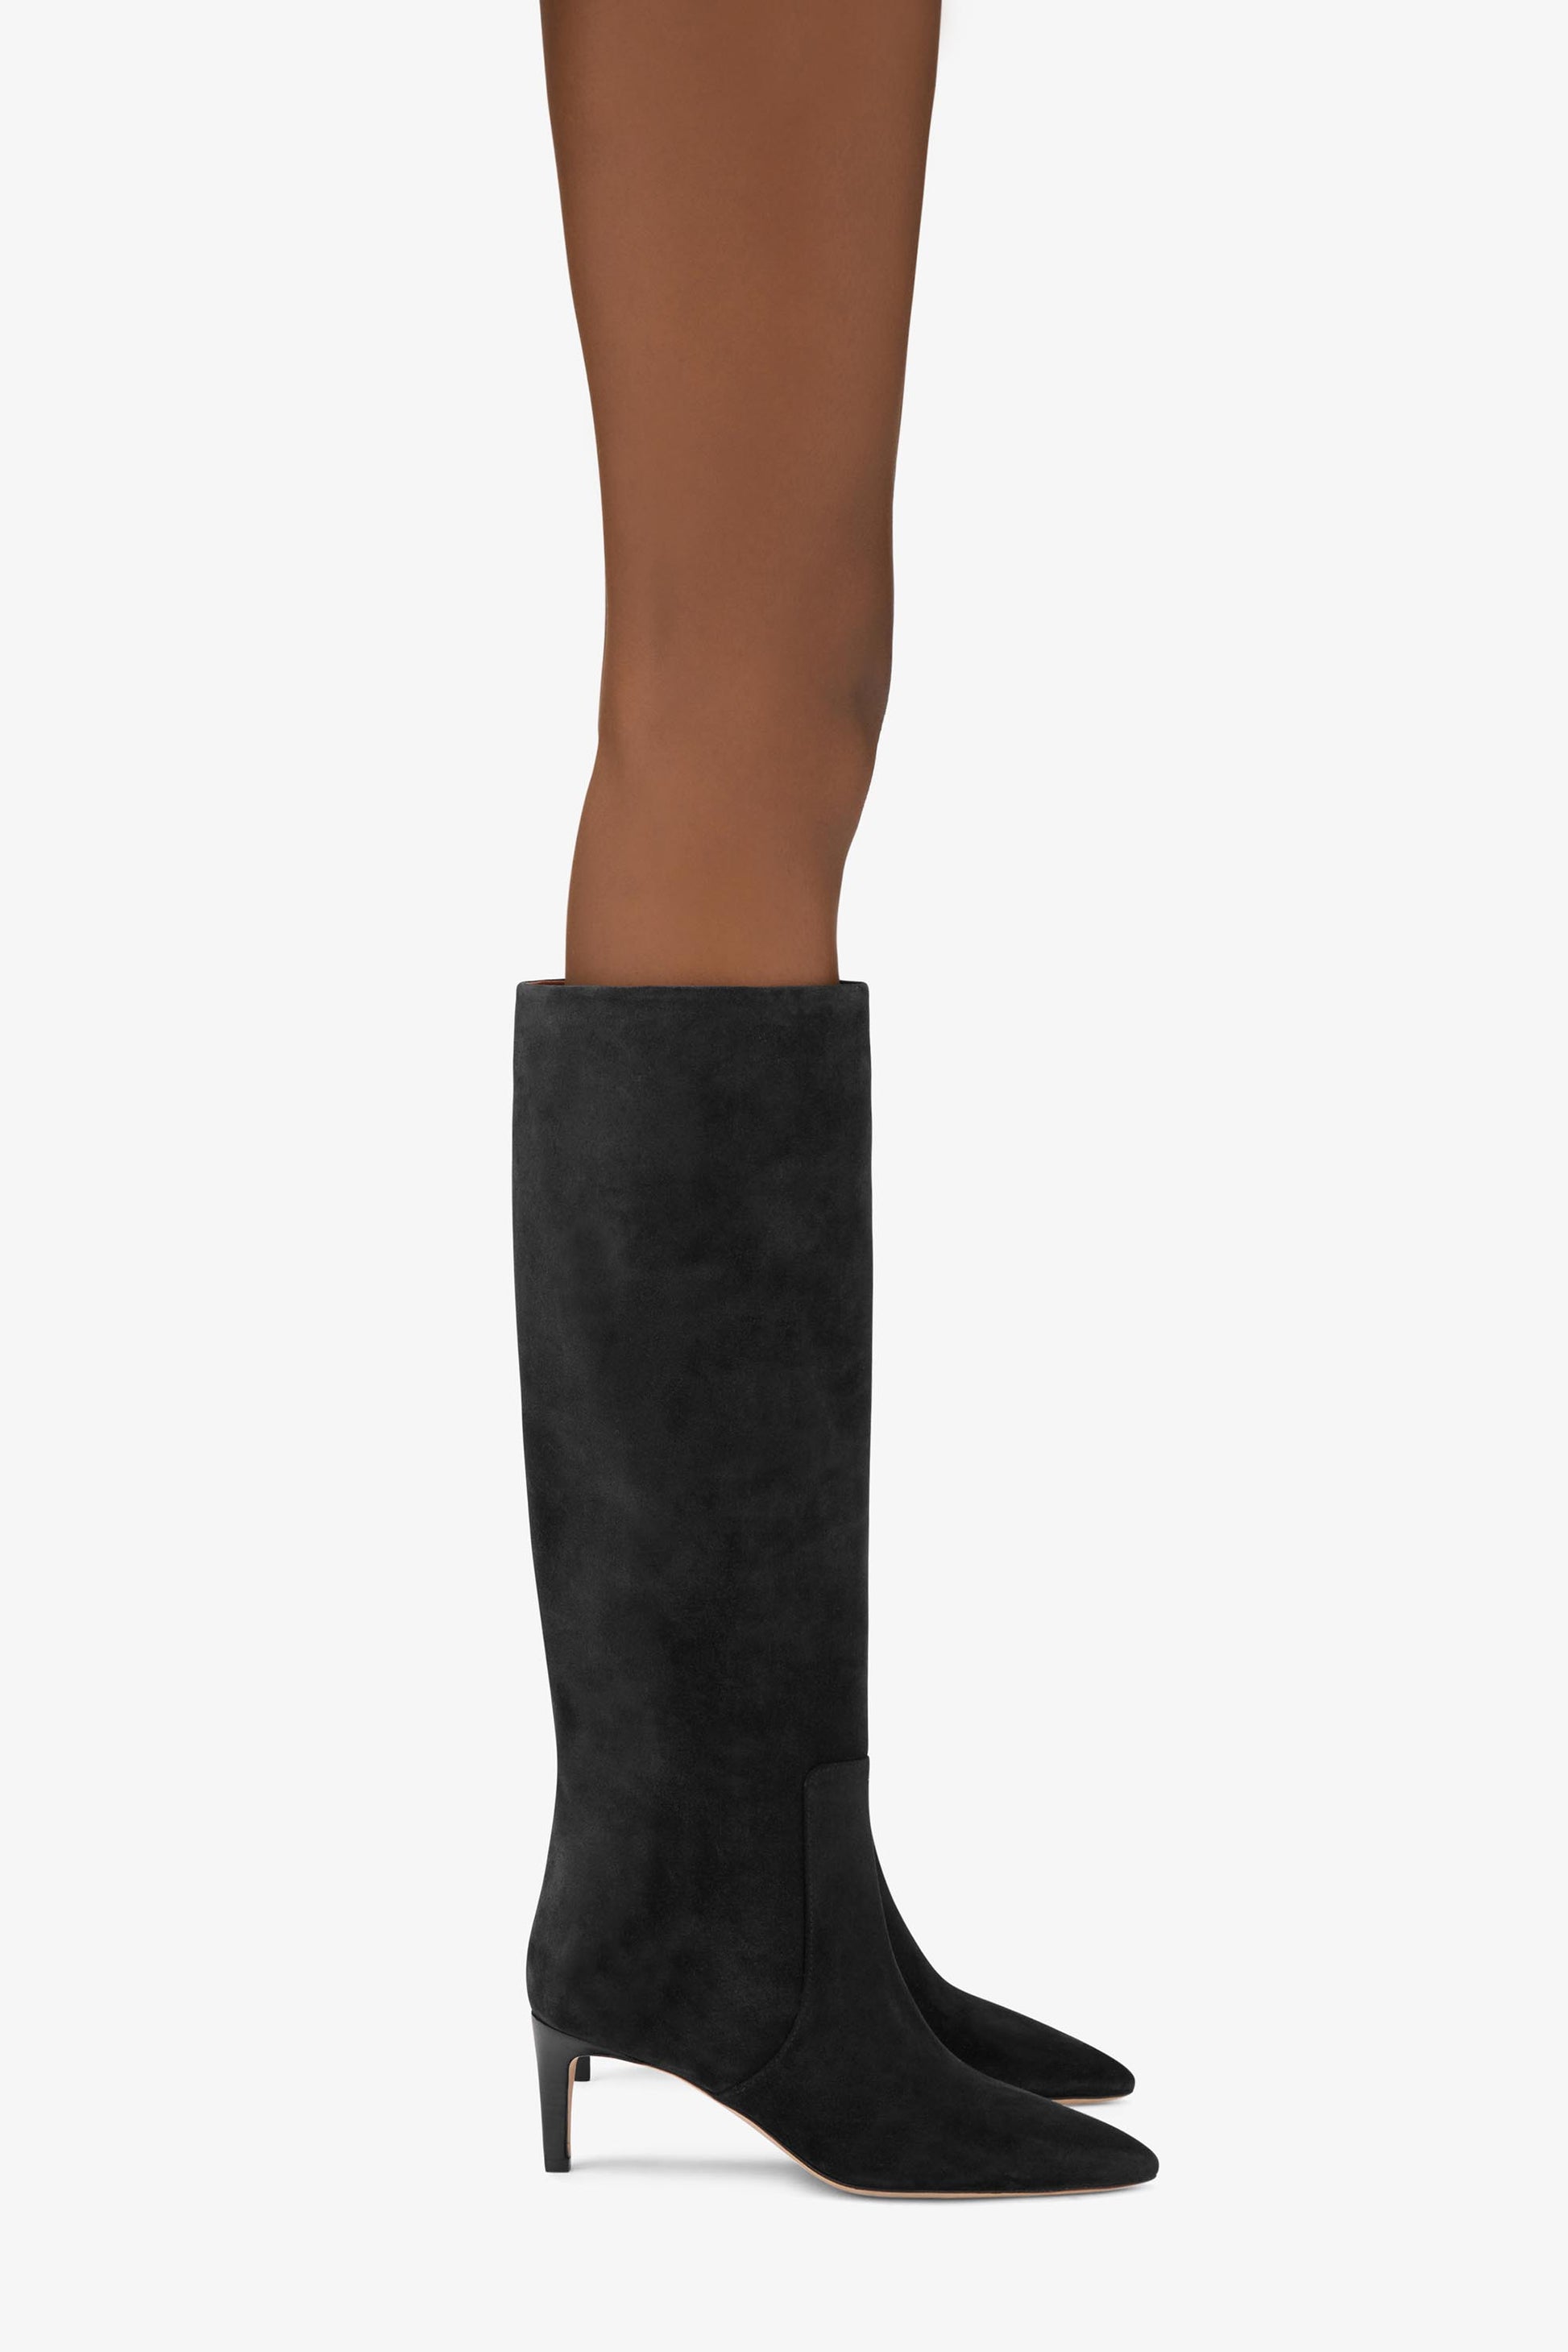 Black suede knee-high boot - Product worn